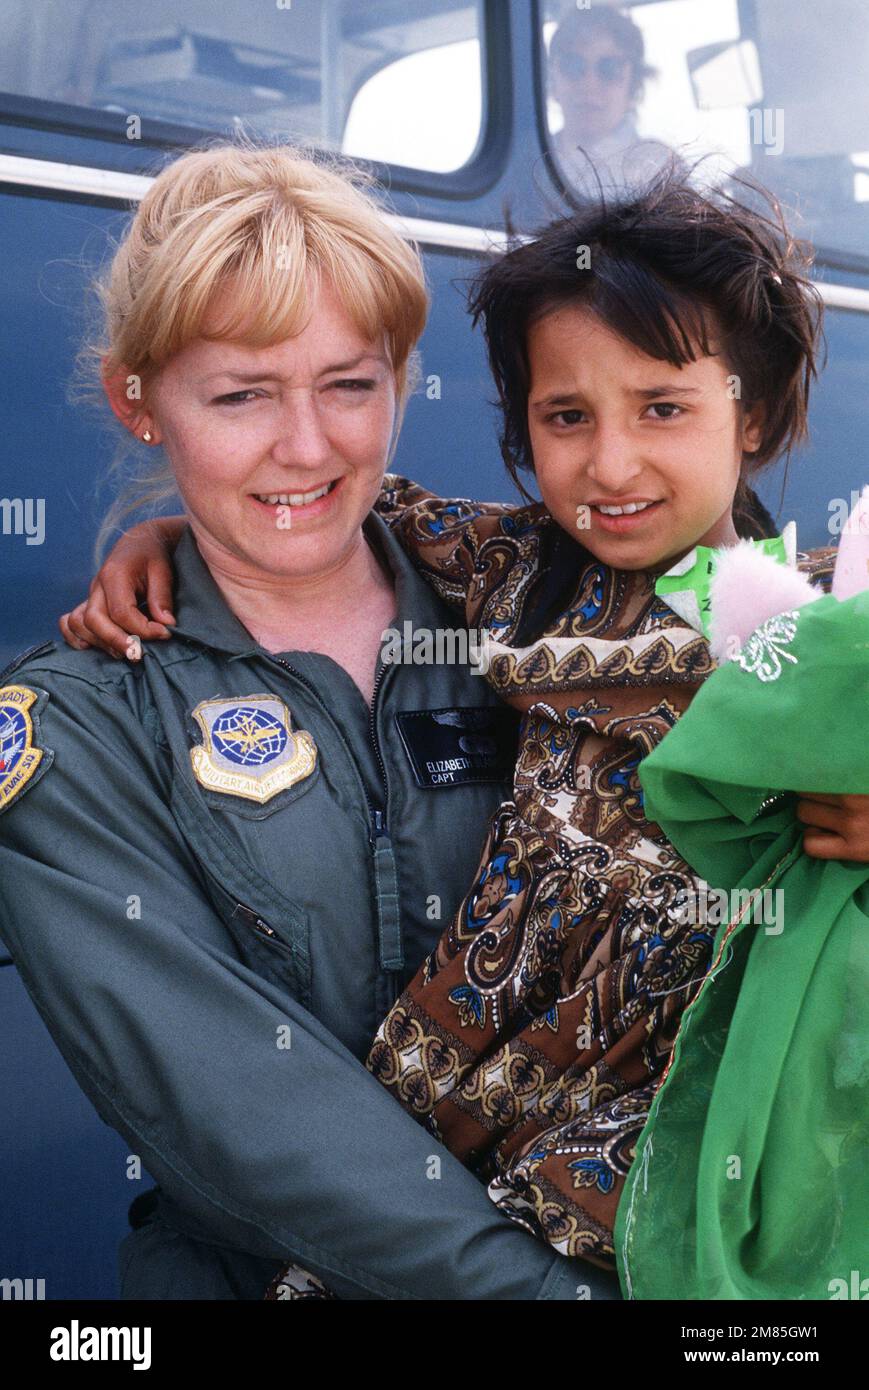 A member of the Military Airlift Command's 2nd Aeromedical Evacuation Squadron holds an Afghan child following the girl's arrival on base aboard a C-141B Starlifter aircraft. The child is one of 25 Afghan civilians being transported to the US Air Force Regional Medical Center at Weisbaden, West Germany, for specialized medical treatment following injuries incurred as a result of Afghanistan's civil war. The patients will later be evacuated to hospitals in Europe and the United States for donated medical assistance. Base: Rhein-Main Air Base Country: Deutschland / Germany (DEU) Stock Photo